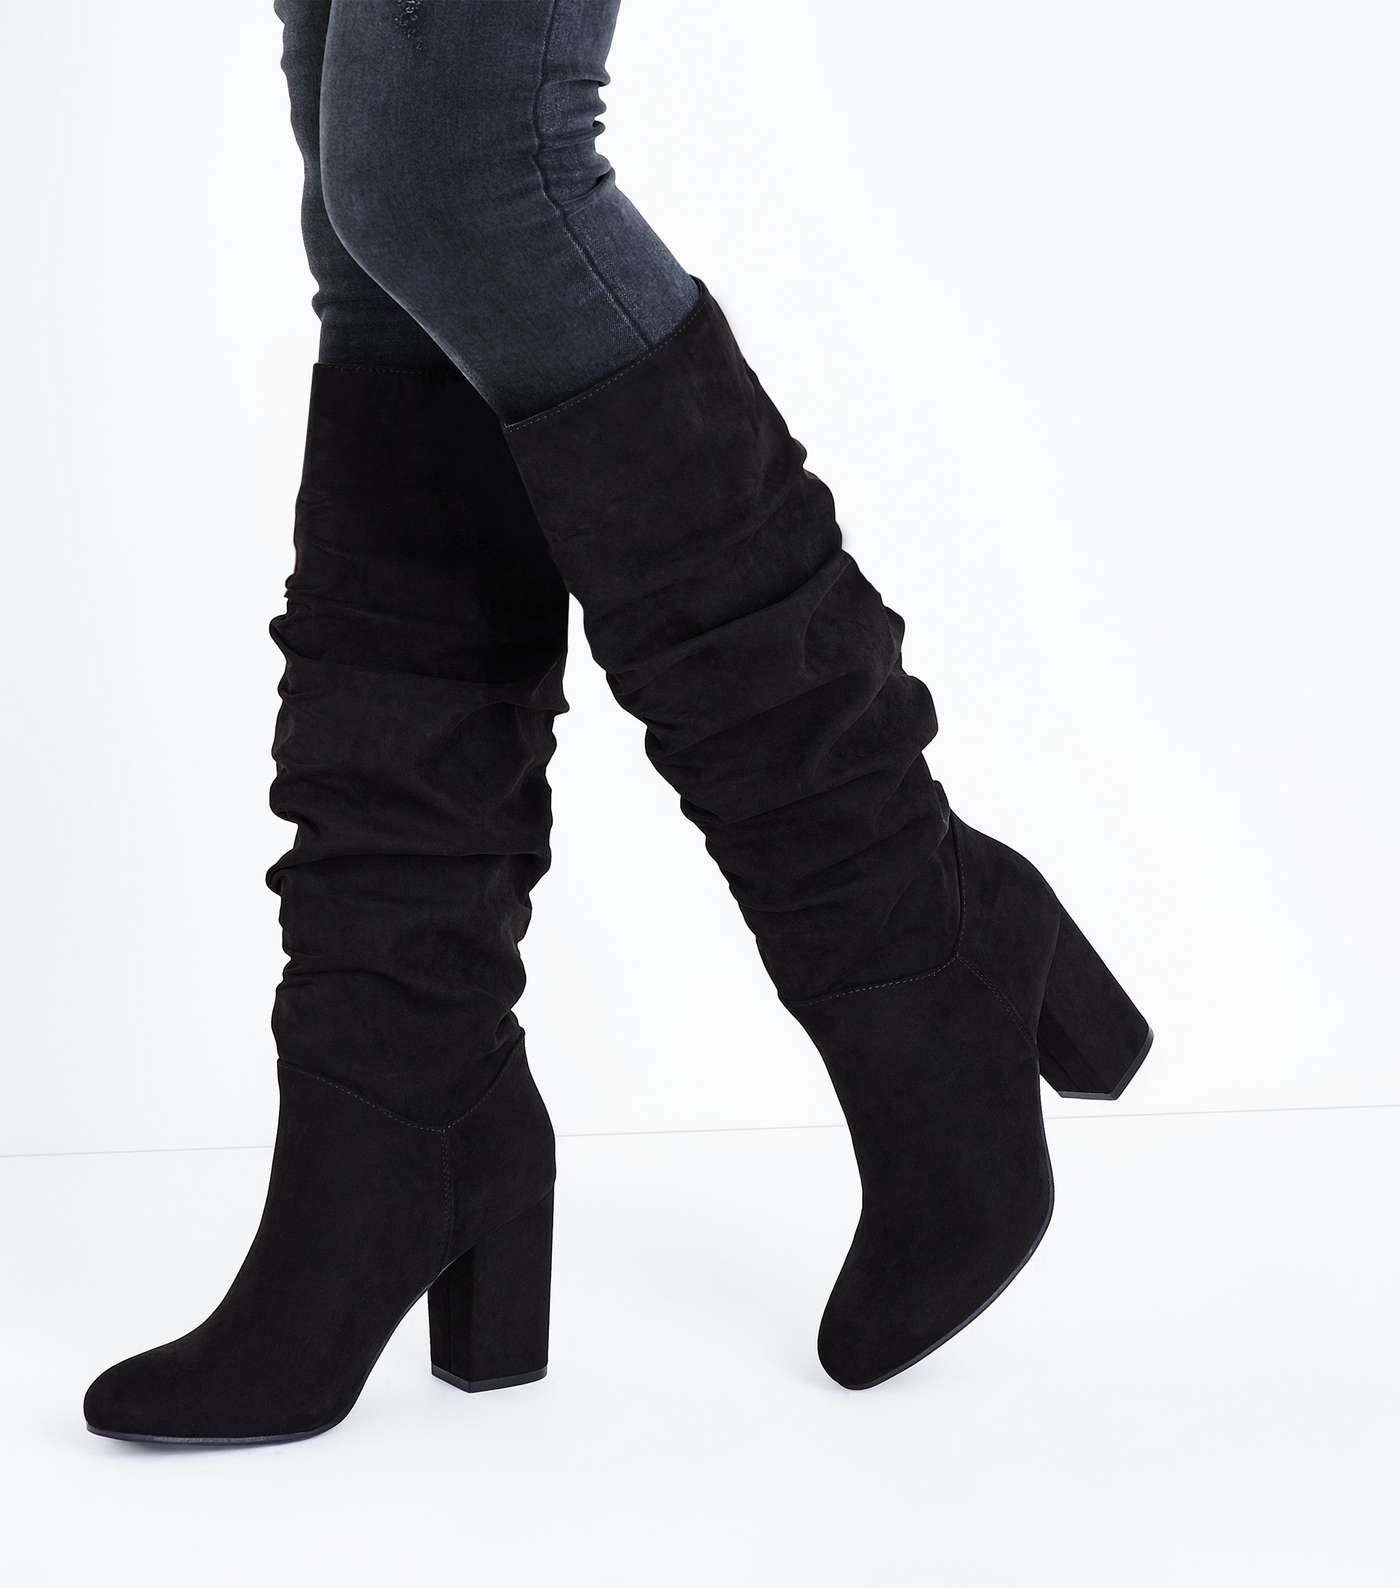 Black Suedette Heeled Slouch Knee High Boots Image 3